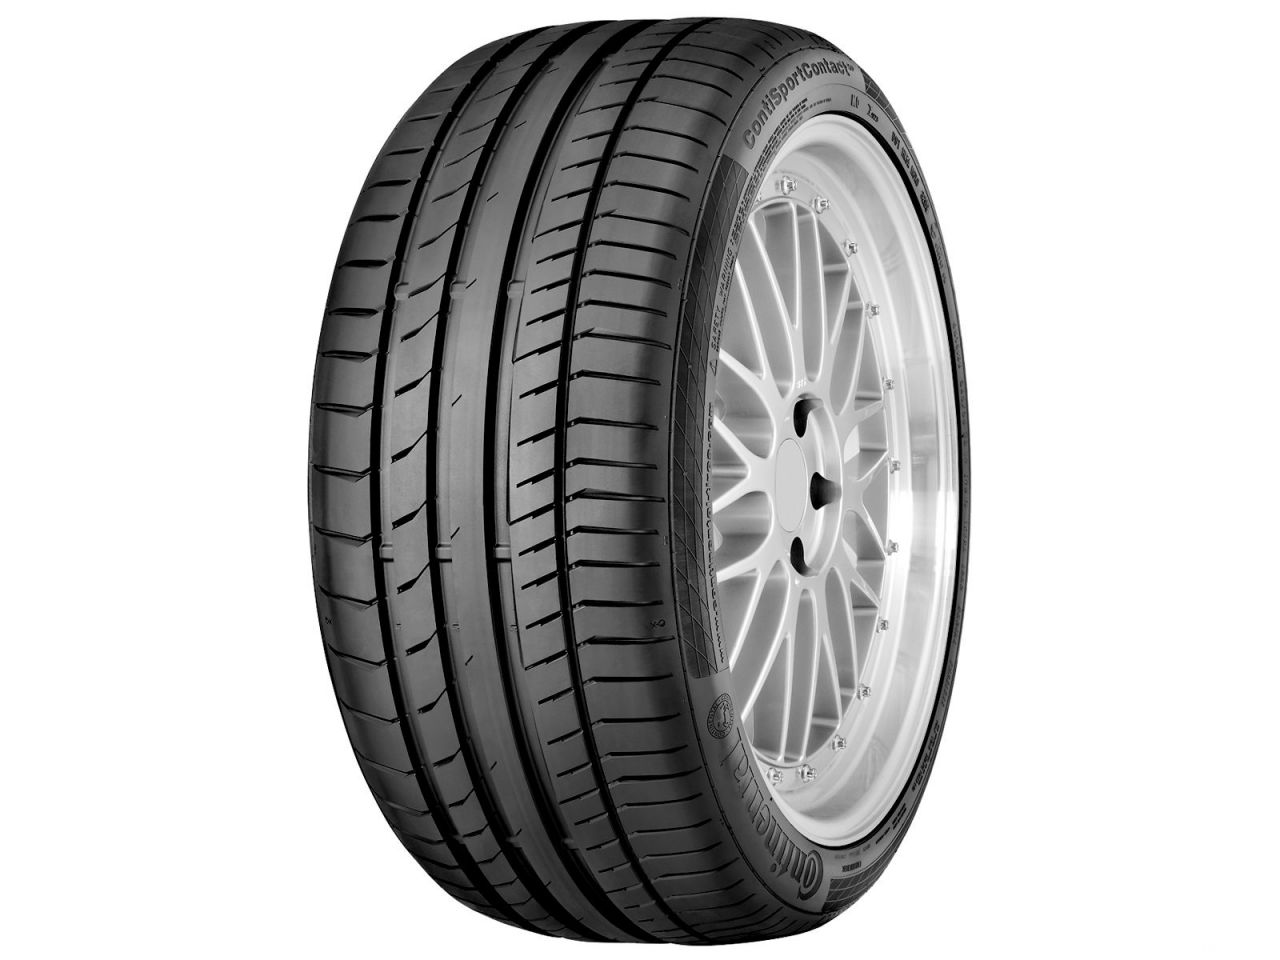 Continental 295/40R21 (MO) summer tyres